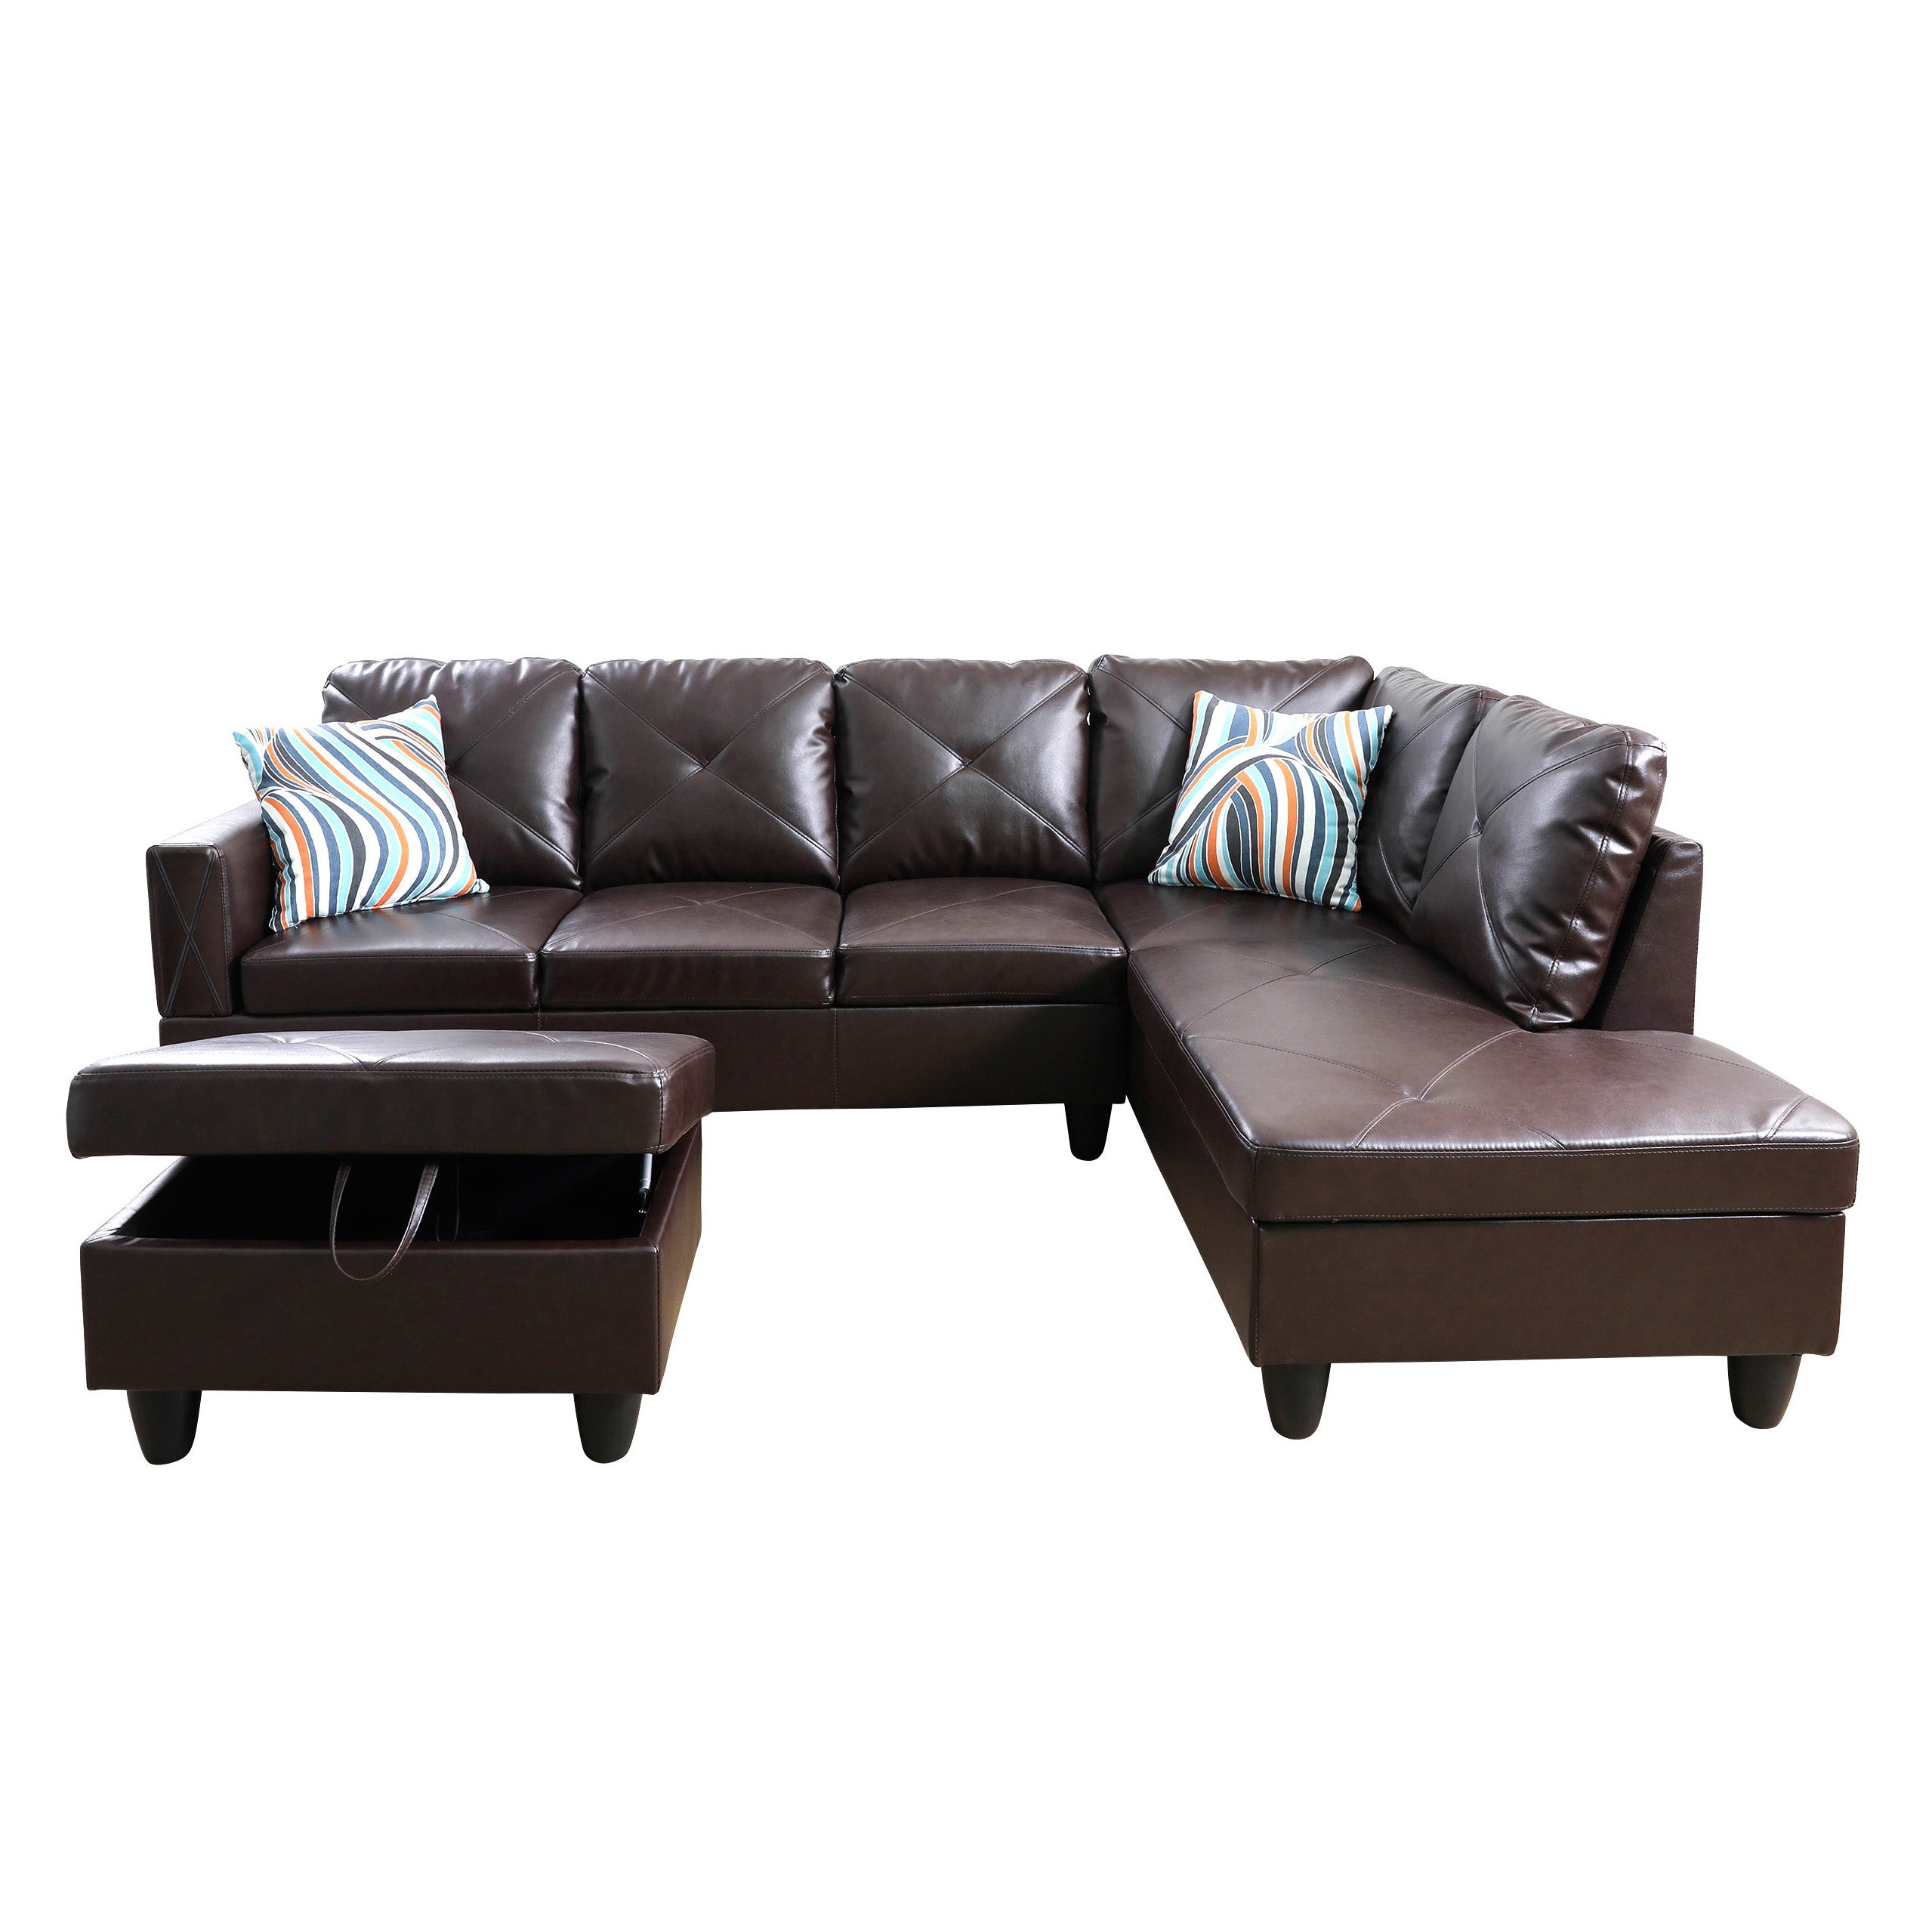 Ainehome Brown L-Shaped Faux Leather Sofa Set